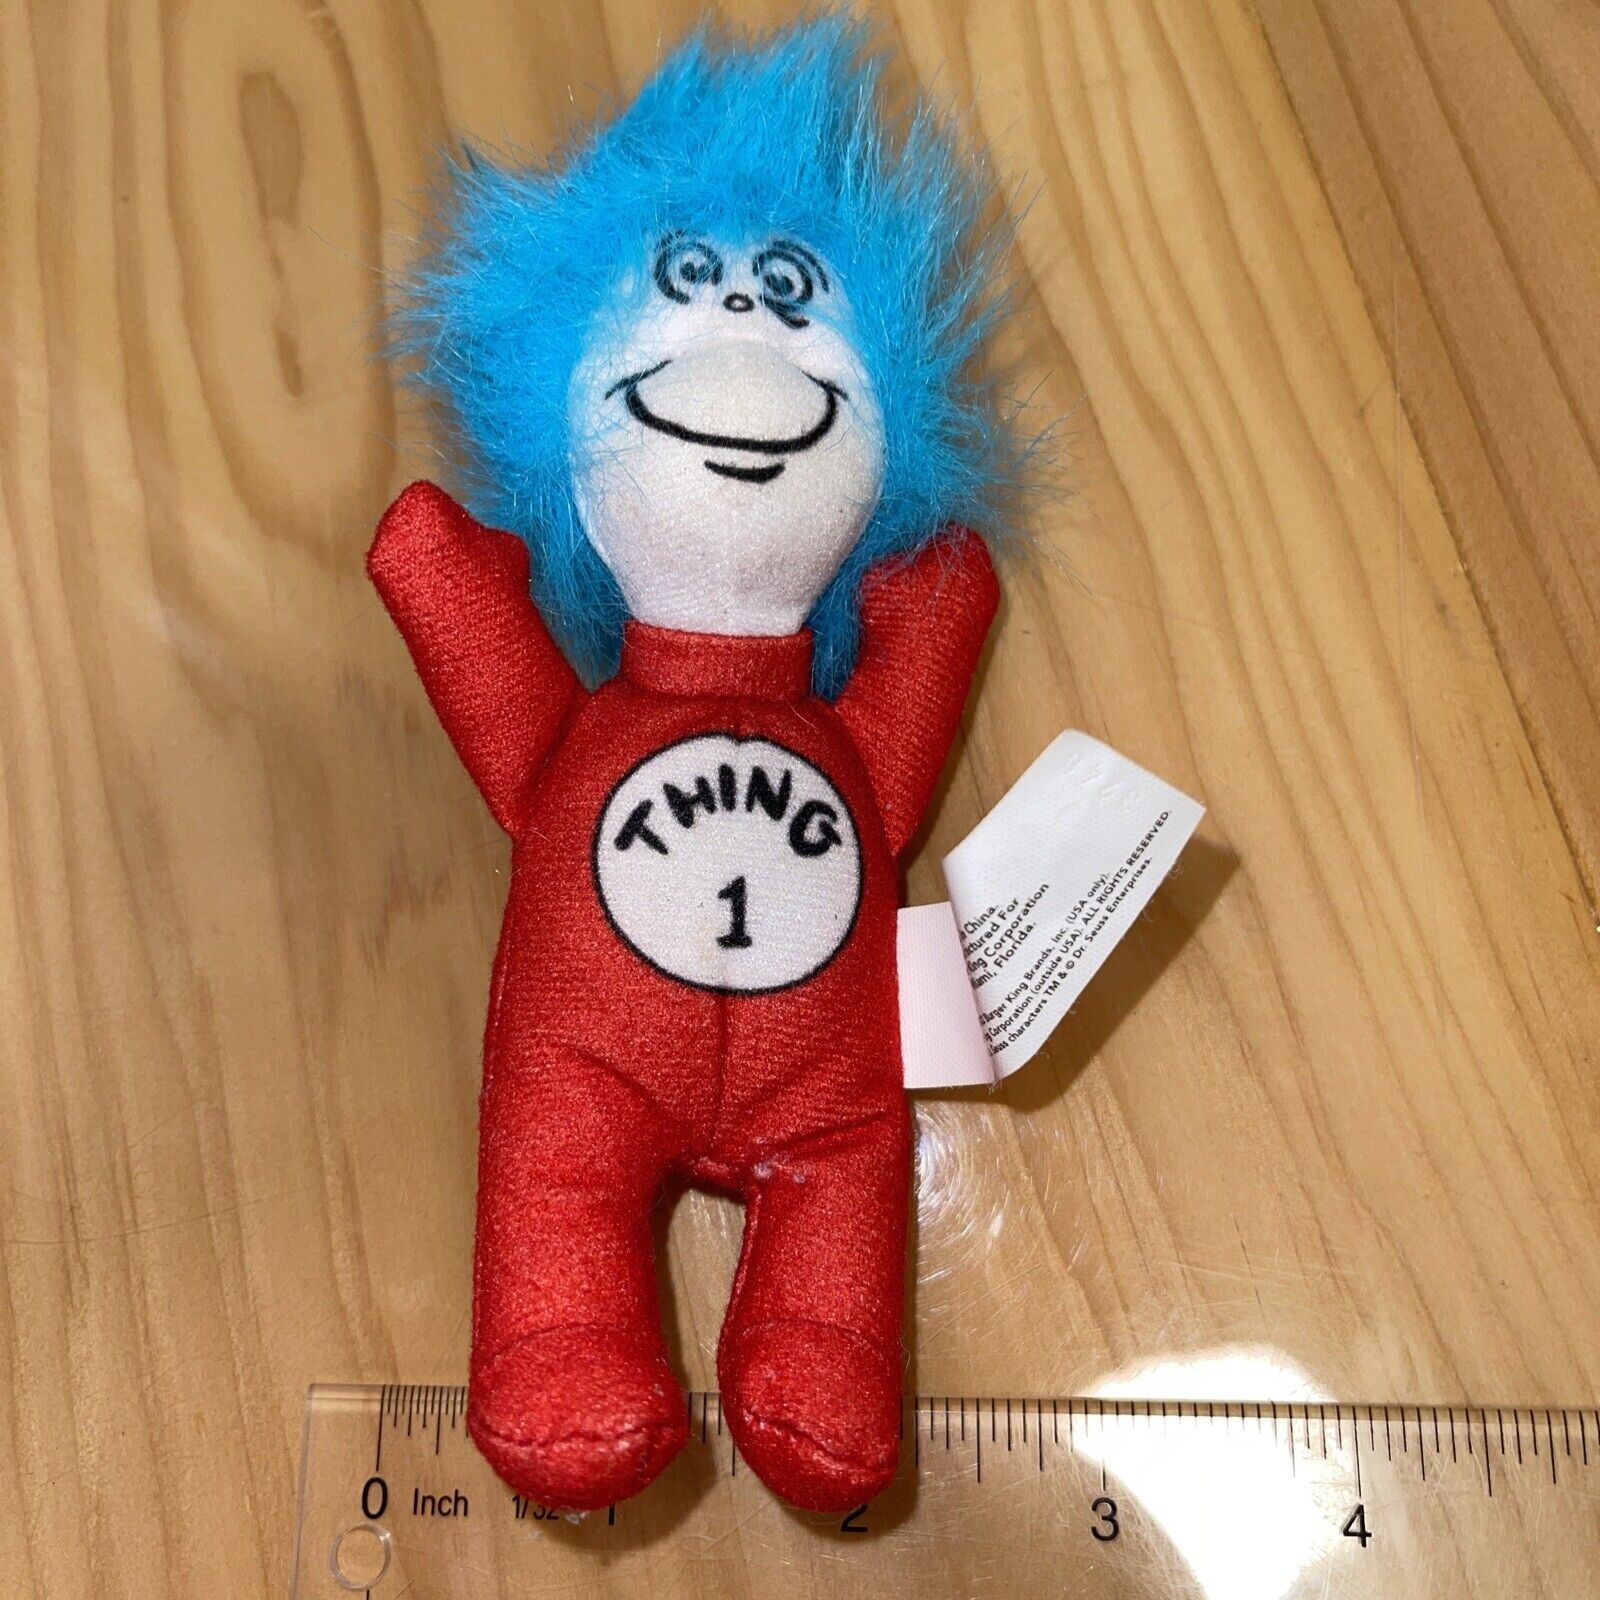 Thing 2 Dr Seuss CAT In The HAT Burger King Kids Meal Toy Plush 2003